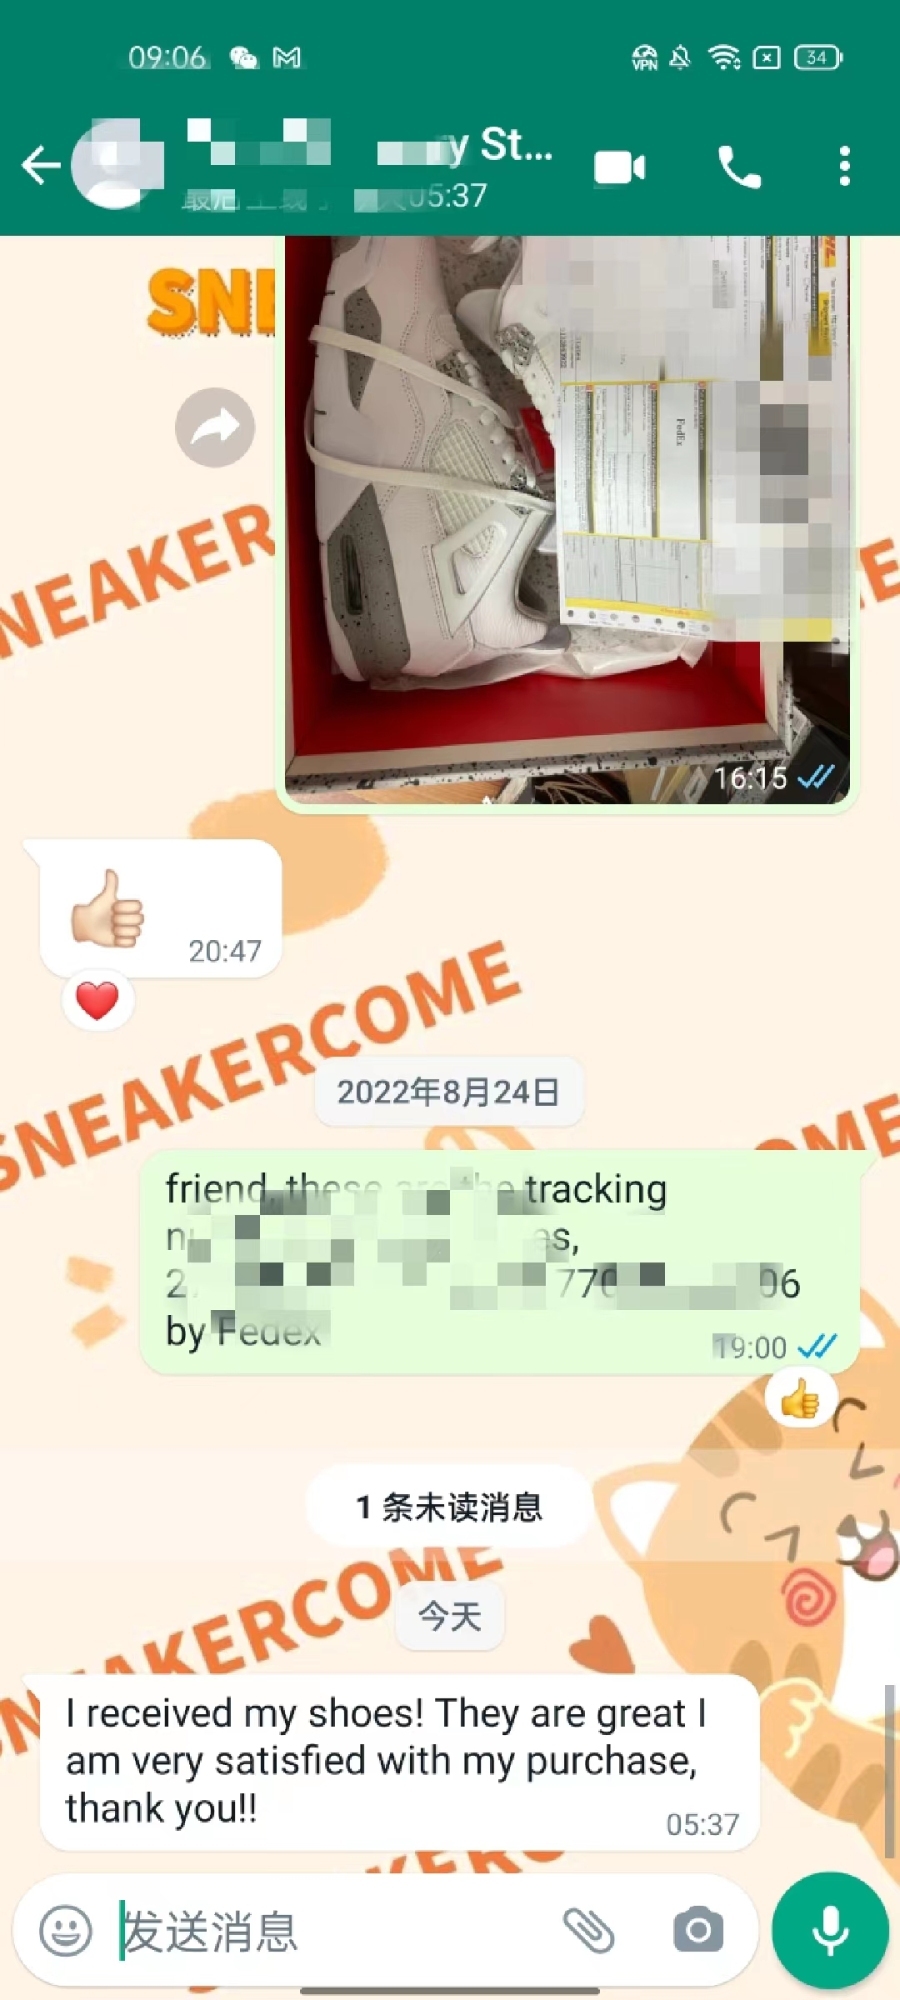 Review of Adidas Yeezy Boost 350 V2 Cream/Triple White CP9366 from sneakercome customer💕